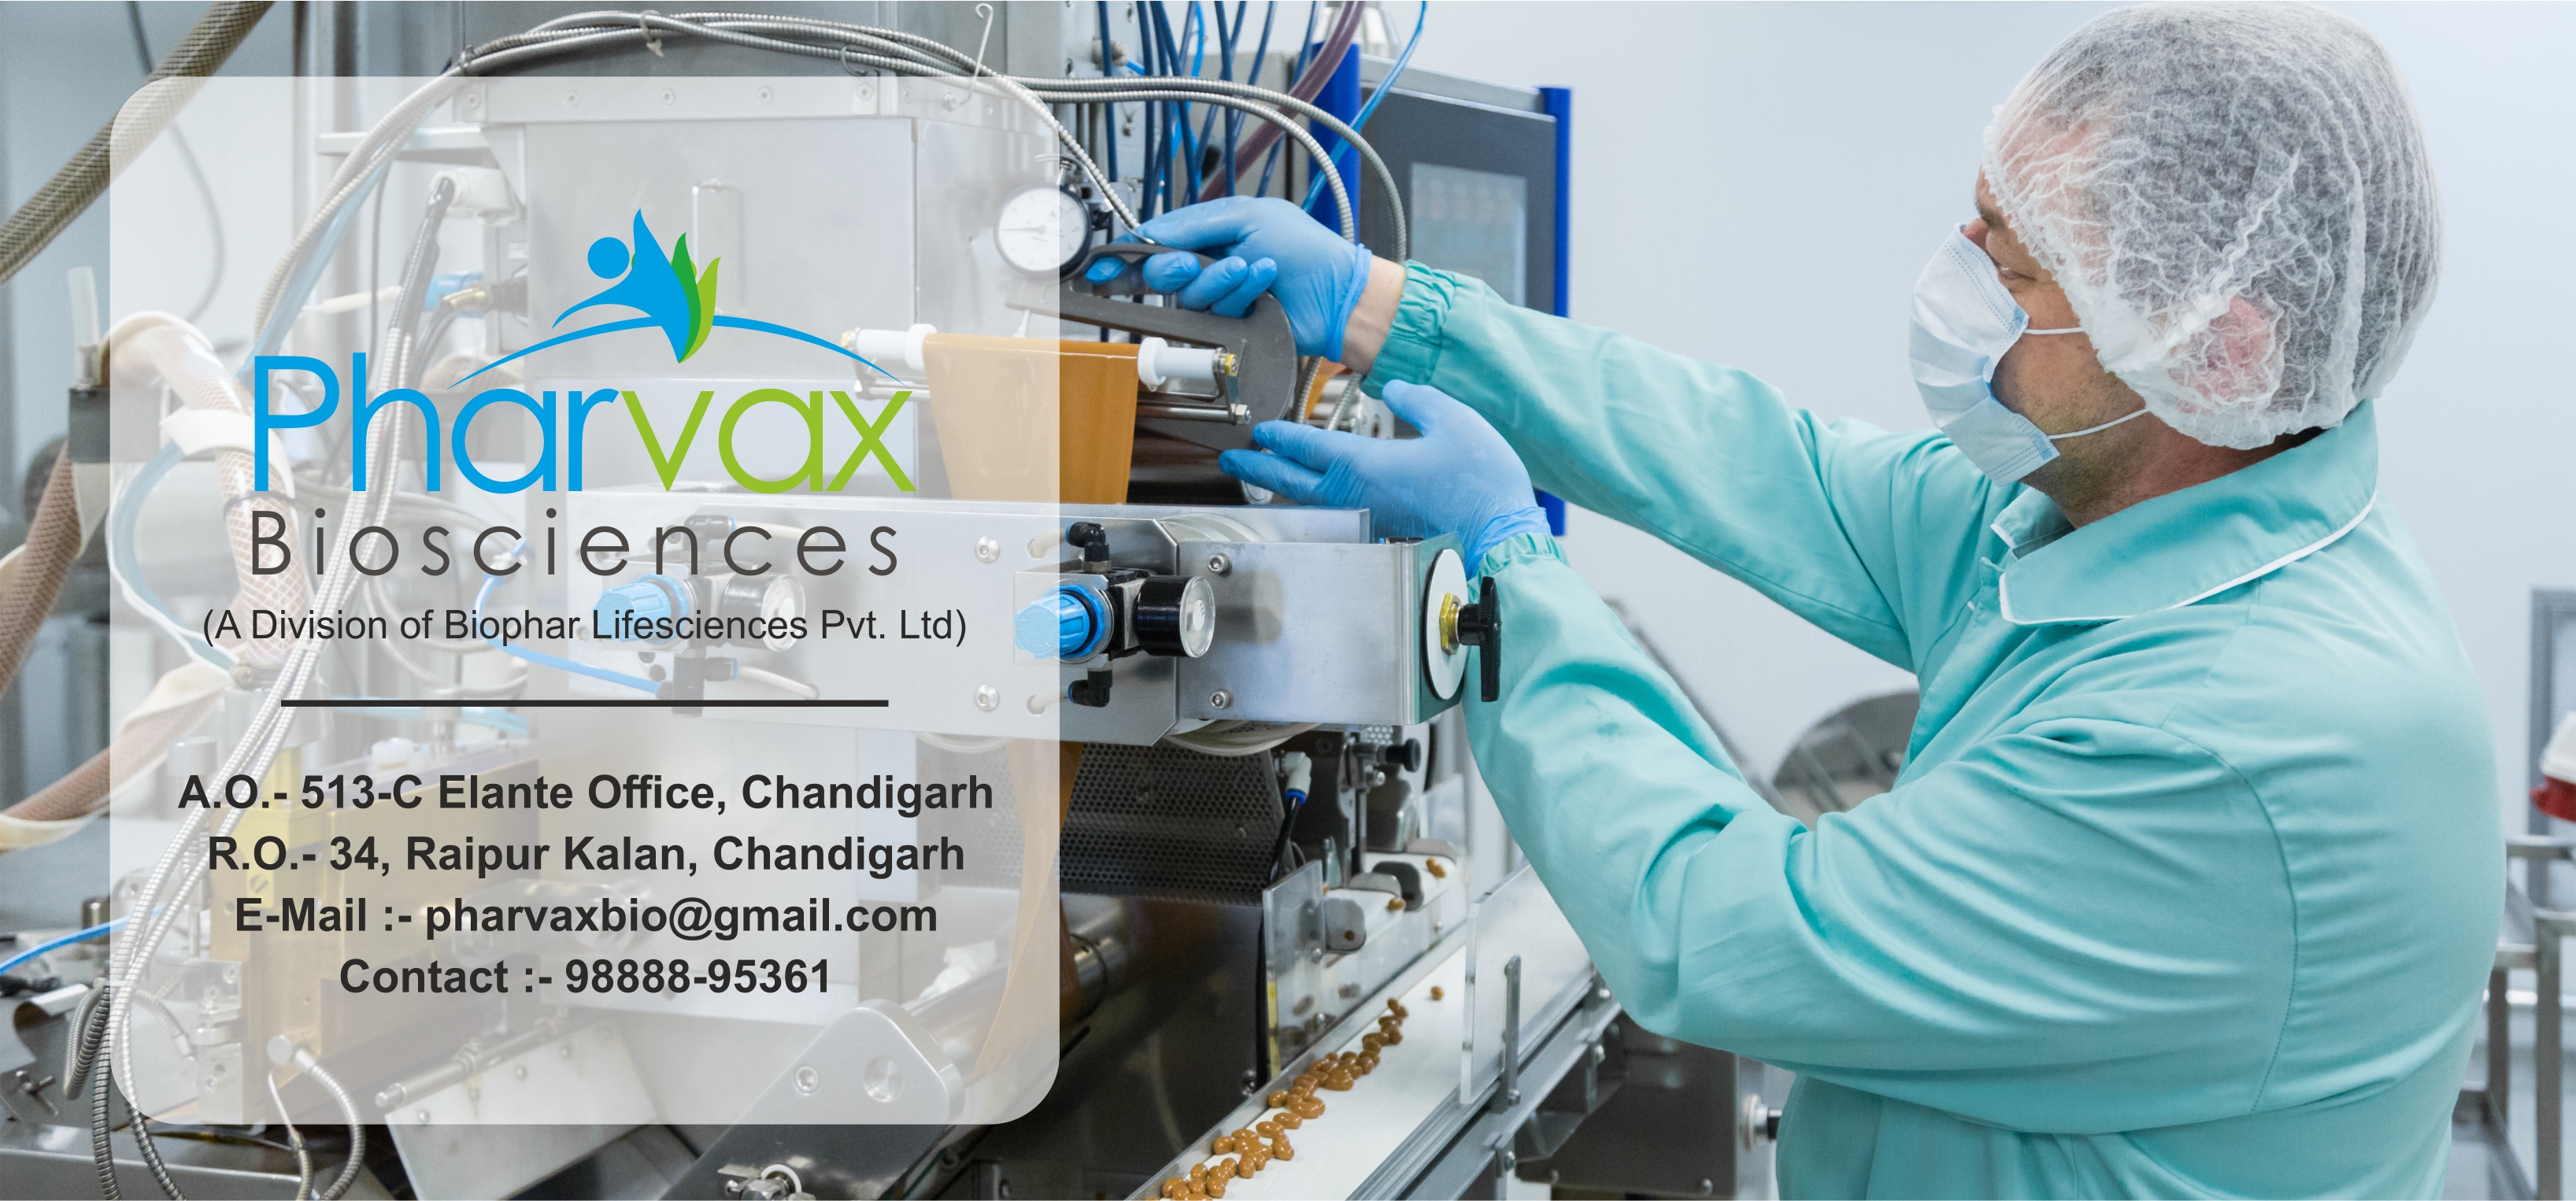 Pharvax Biosciences, Pharmaceutical Third party manufacturing company in Belagavi, Third party manufacturing company in Belagavi, Top Third party manufacturing company in Belagavi